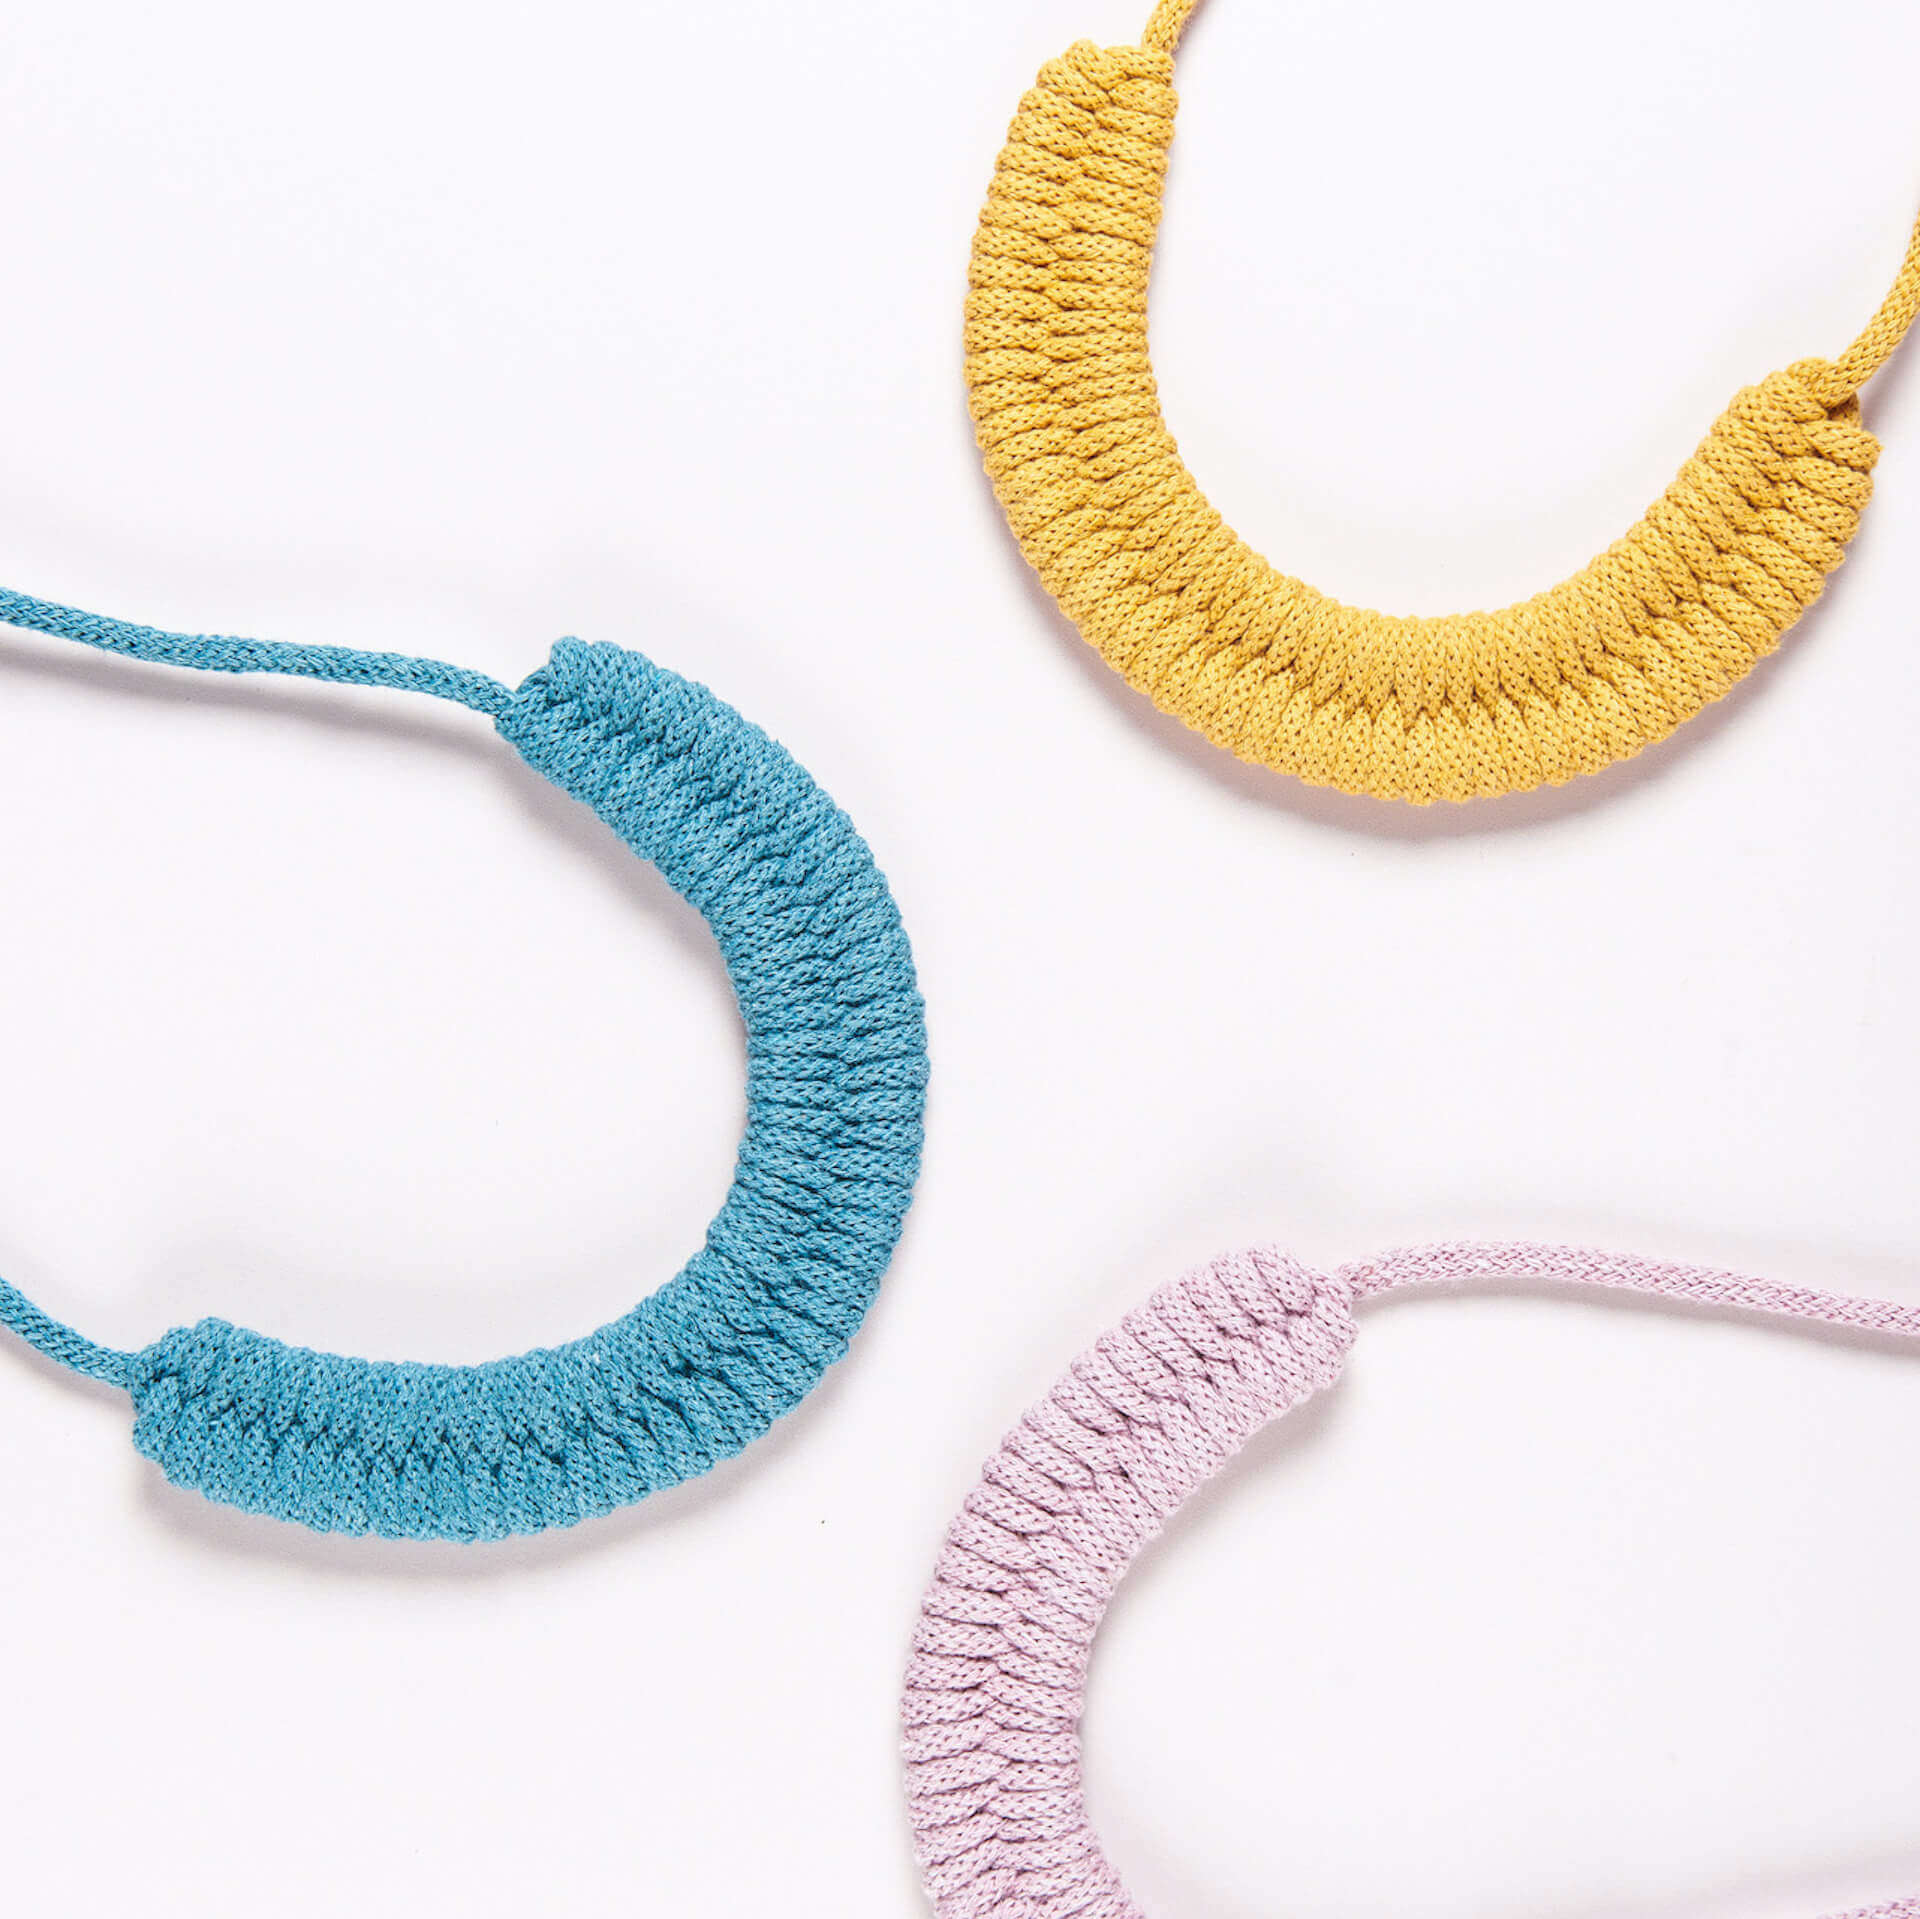 WOVEN NECKLACE KIT: Mustard - Dusty Pink - Teal